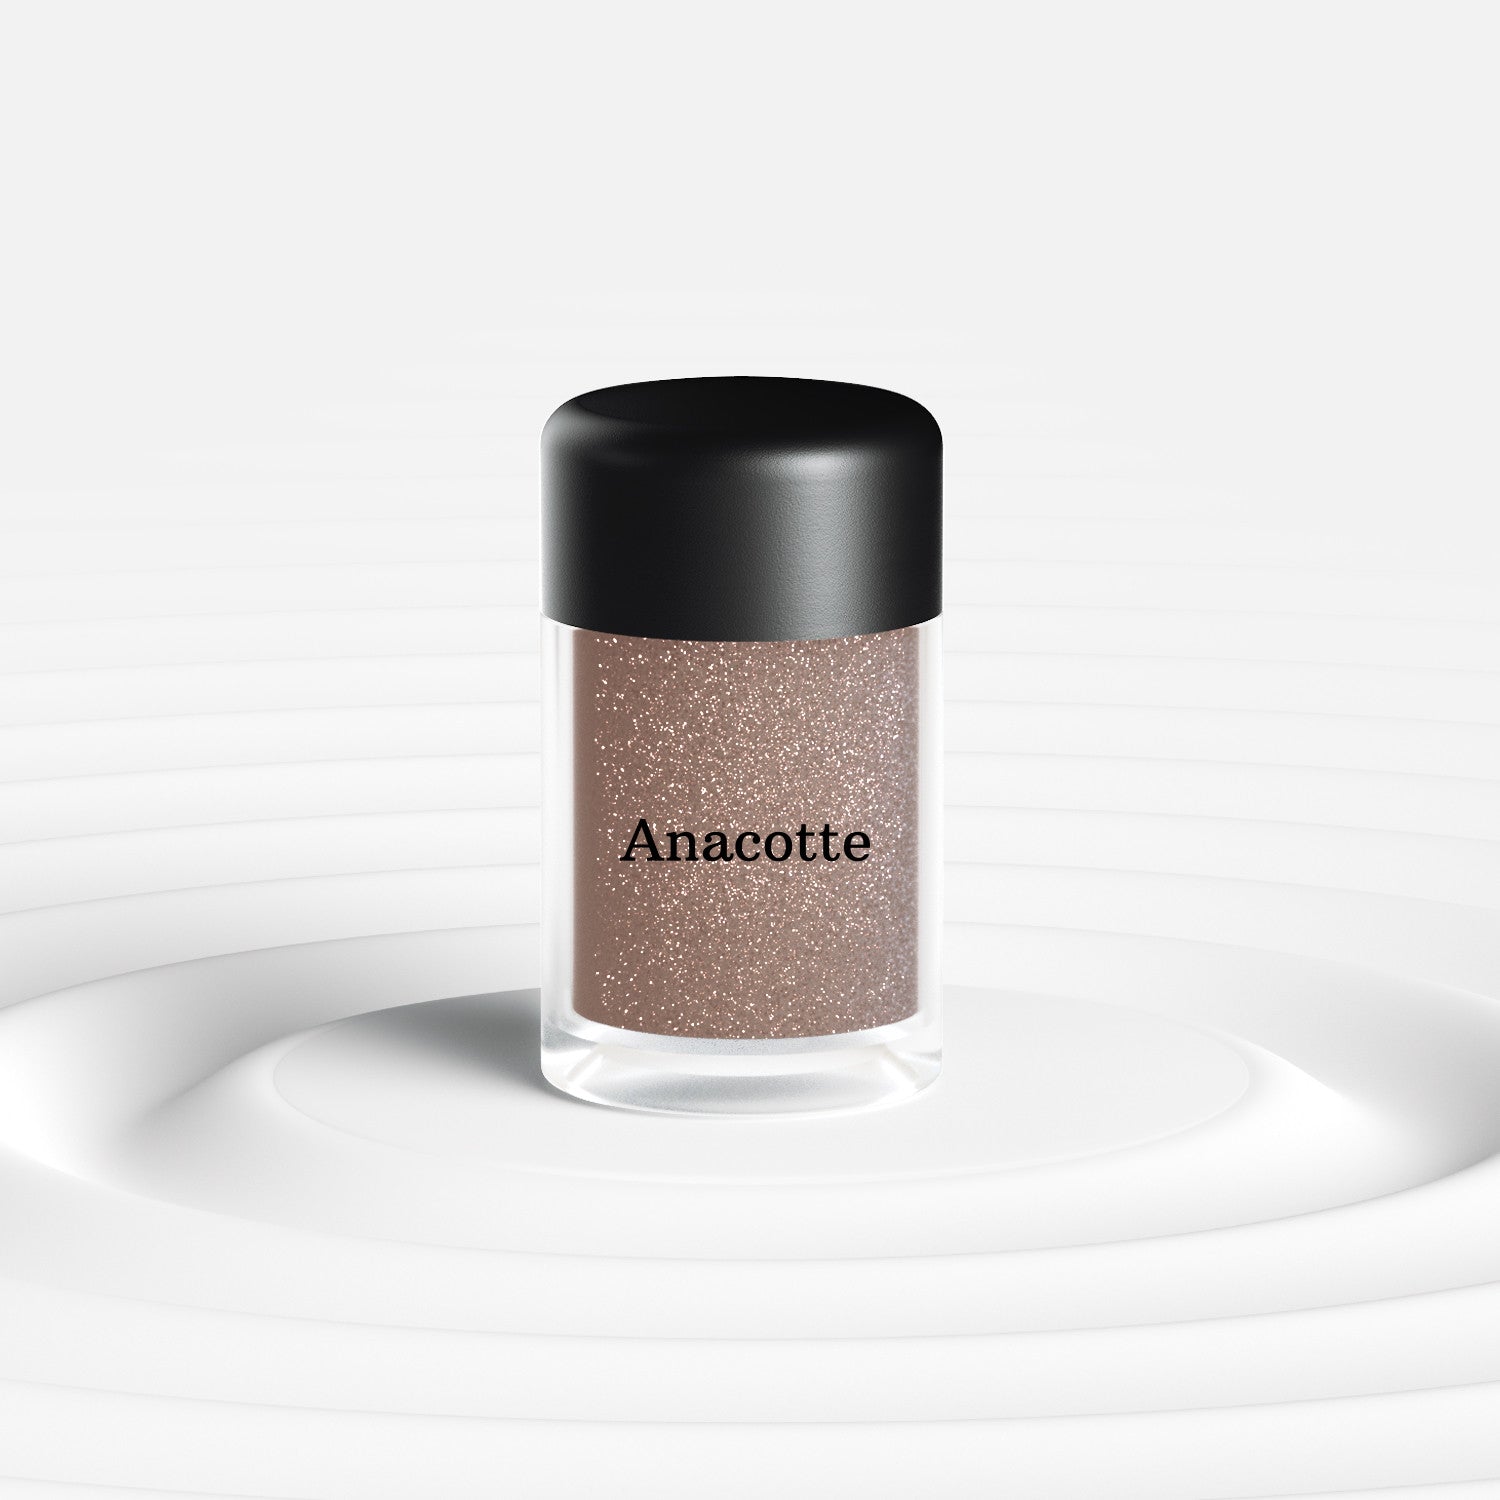 Anacotte Fine Mineral Star Dust - Long-Lasting Effects